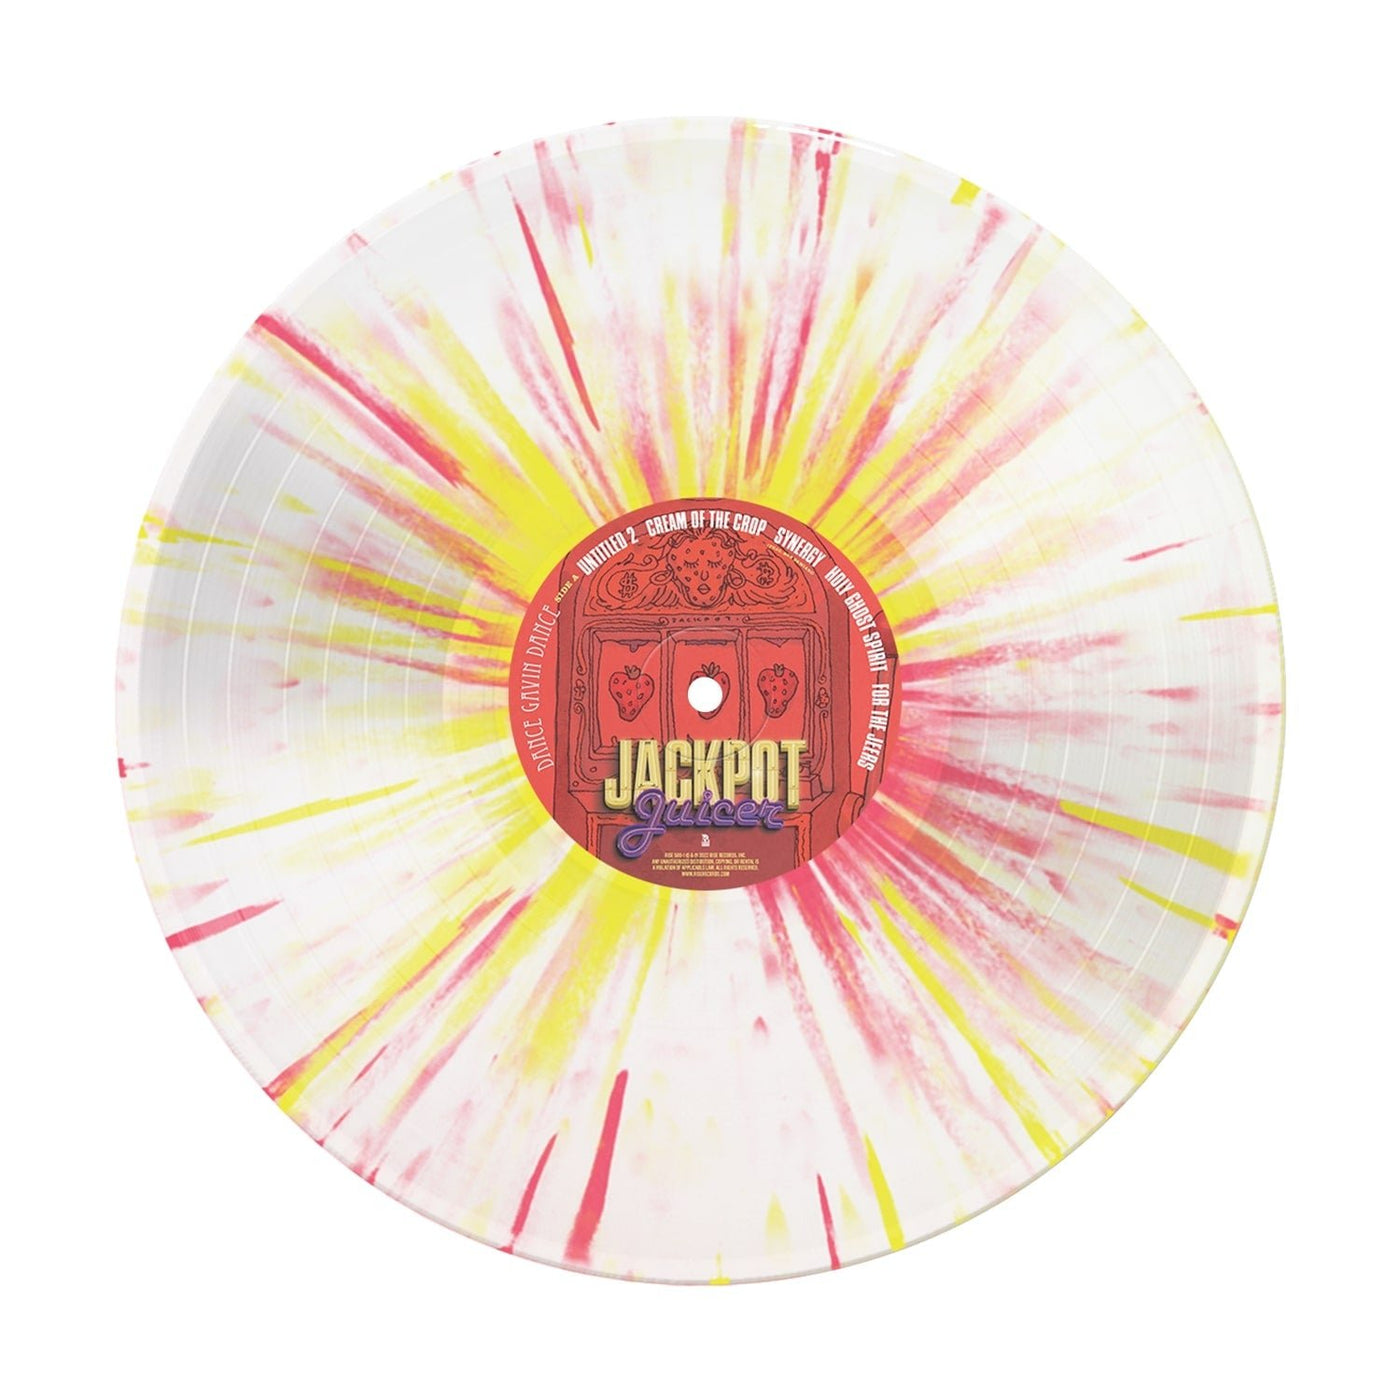 Image of Dance Gavin Dance Jackpot Juicer vinyl outside of its sleeve on a white background. Vinyl color is clear with yellow and pink splatter. 